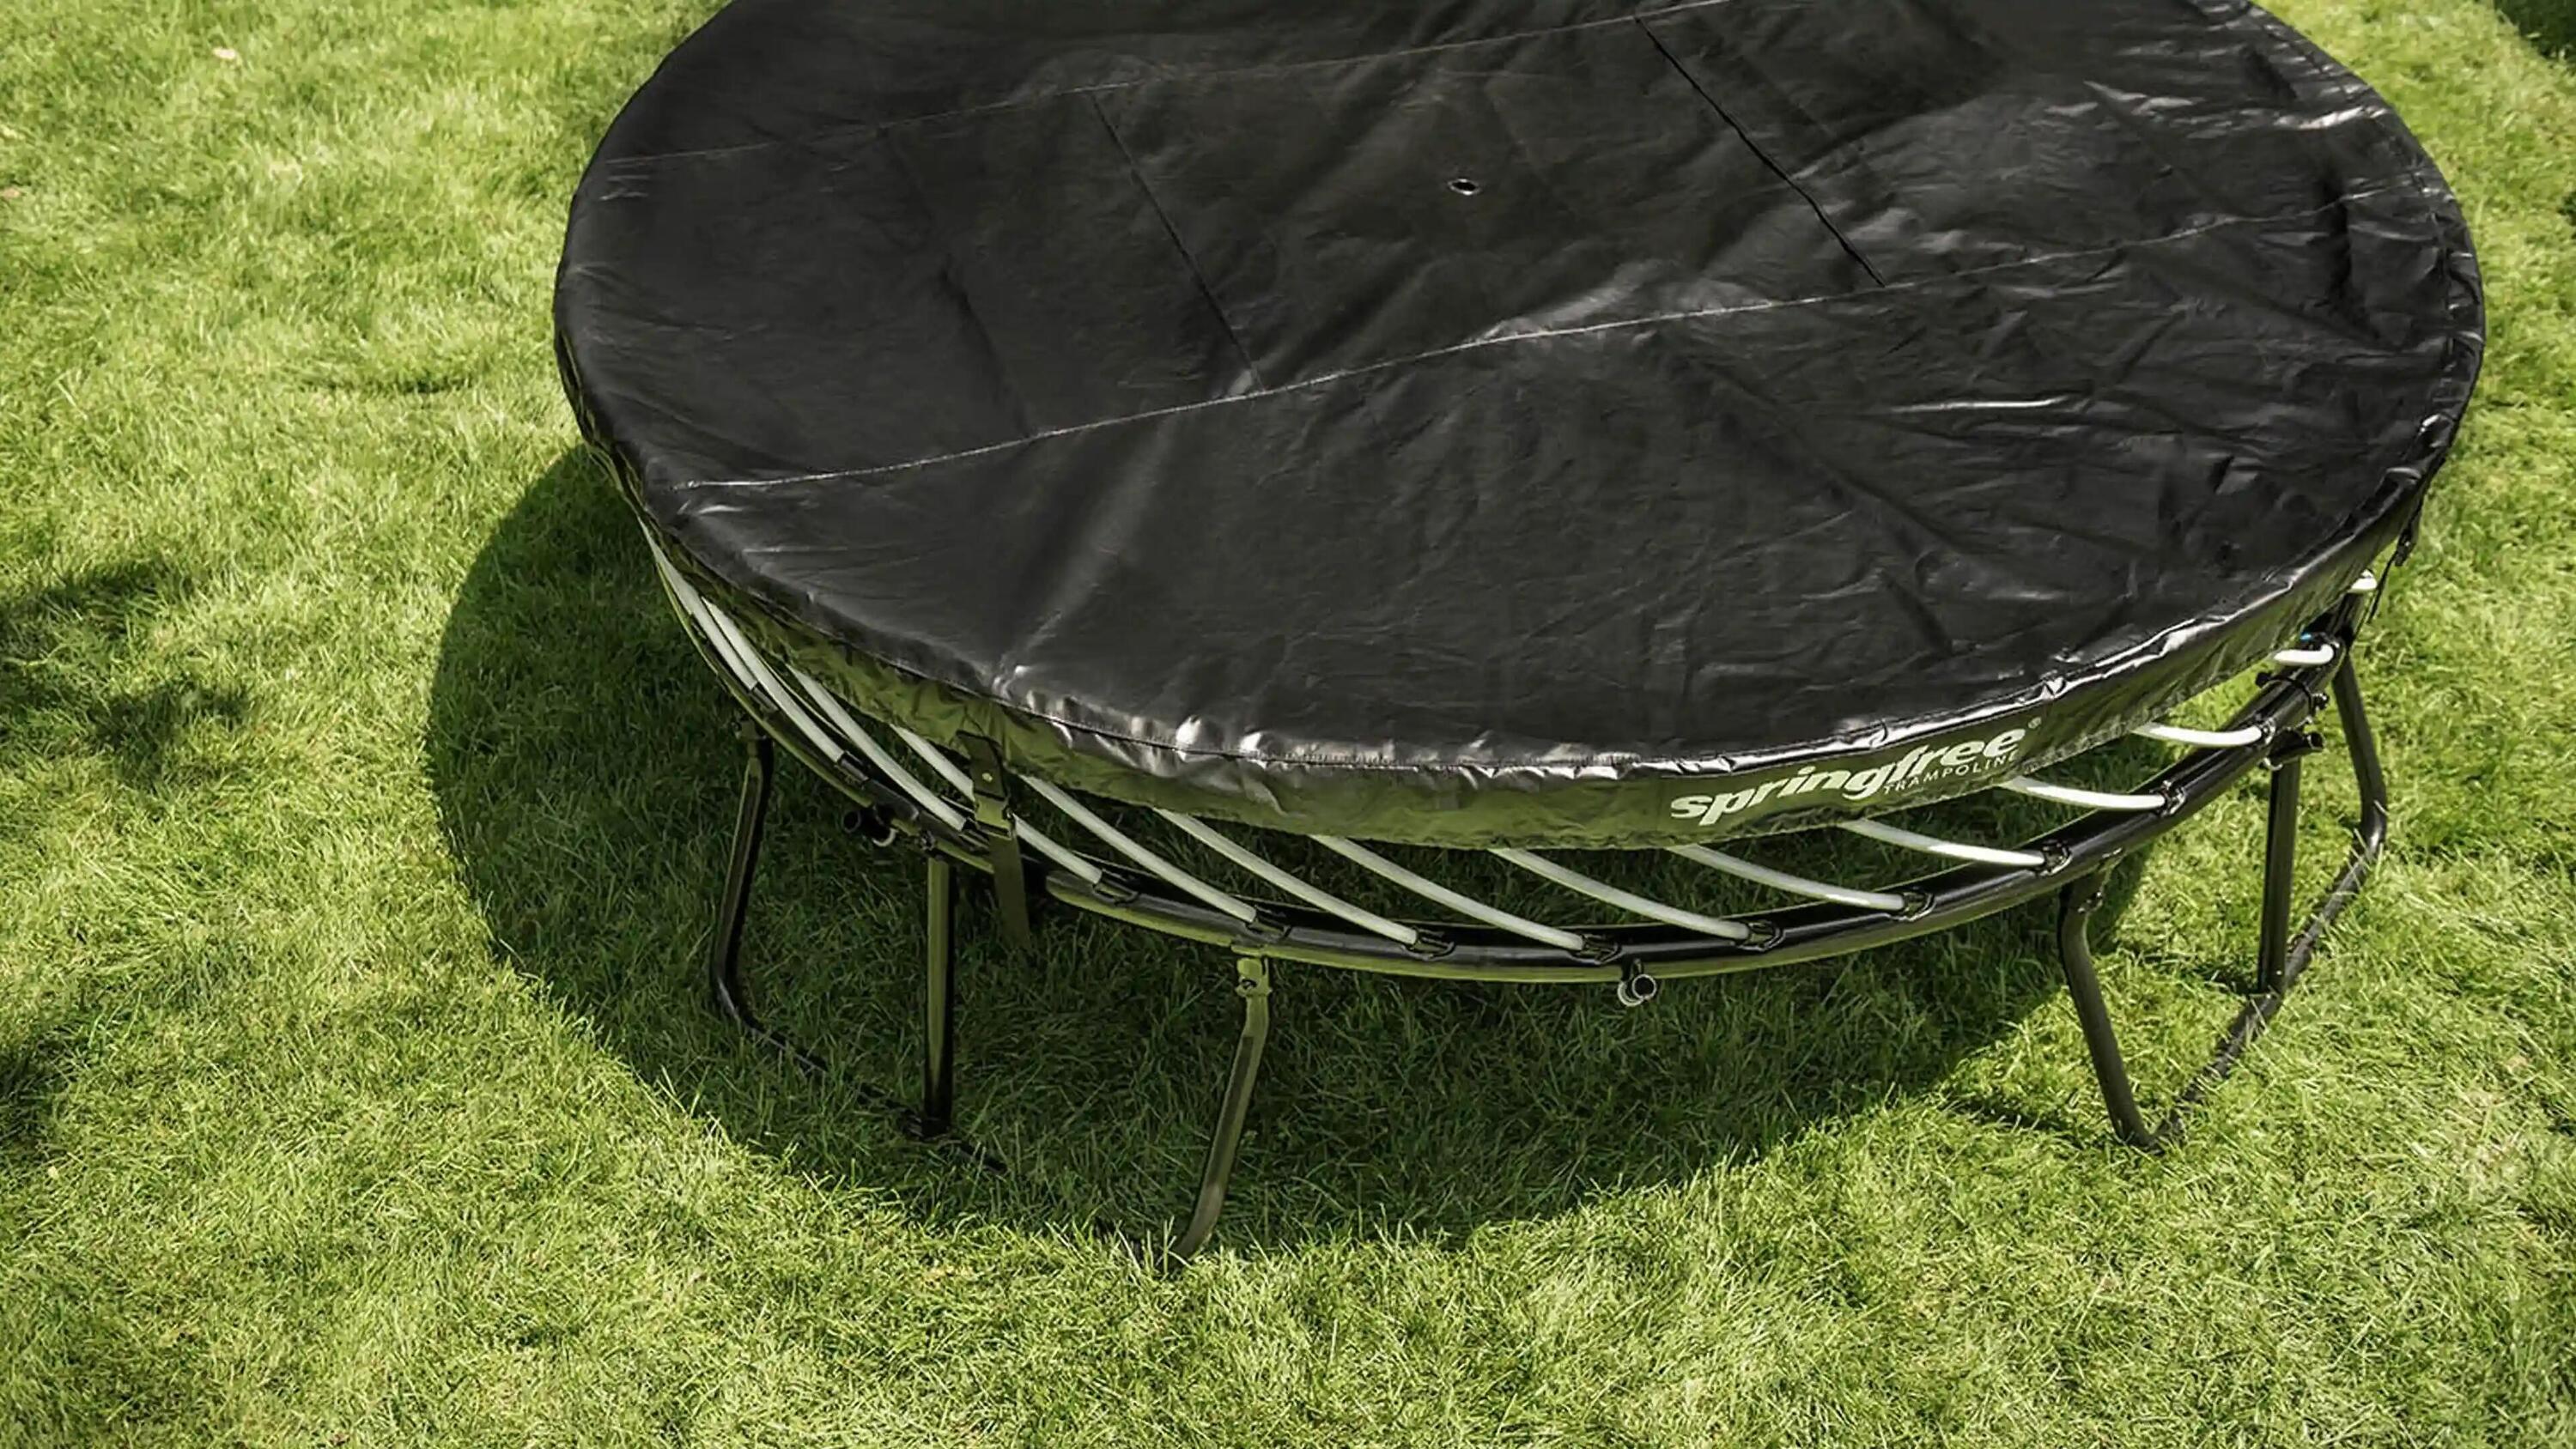 Springfree Trampoline All-Weather Cover for Medium Round 2/3